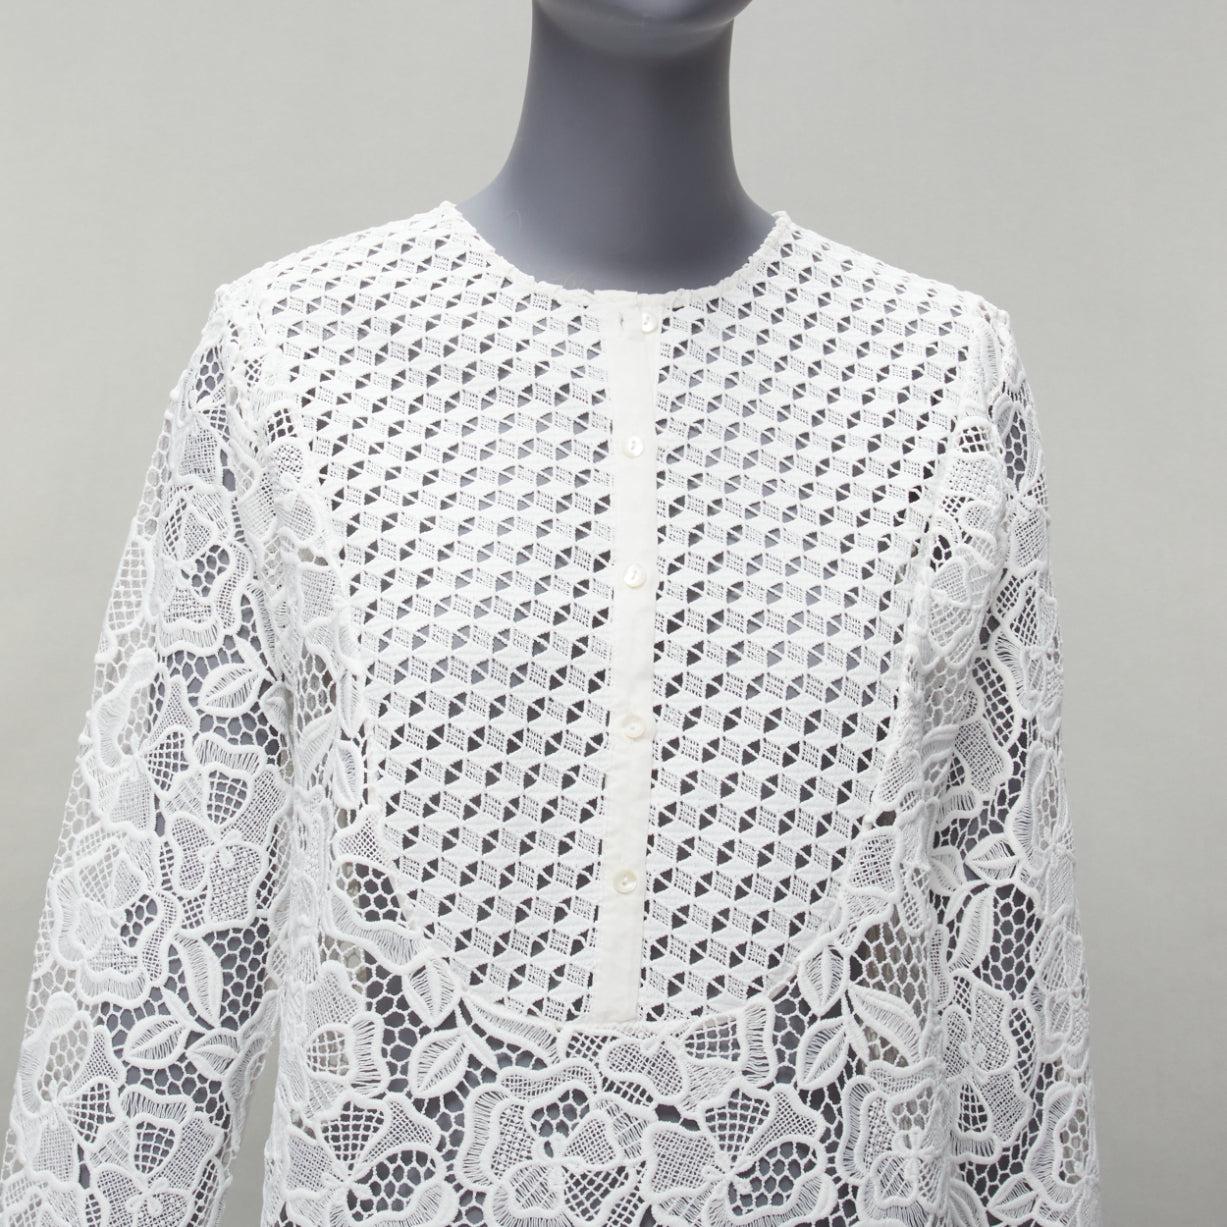 ERMANNO SCERVINO Beachwear white contrasting lace crew neck shirt dress IT40 S
Reference: SNKO/A00285
Brand: Ermanno Scervino
Collection: Beachwear
Material: Polyester
Color: White, Off White
Pattern: Lace
Closure: Button
Extra Details: Button stand